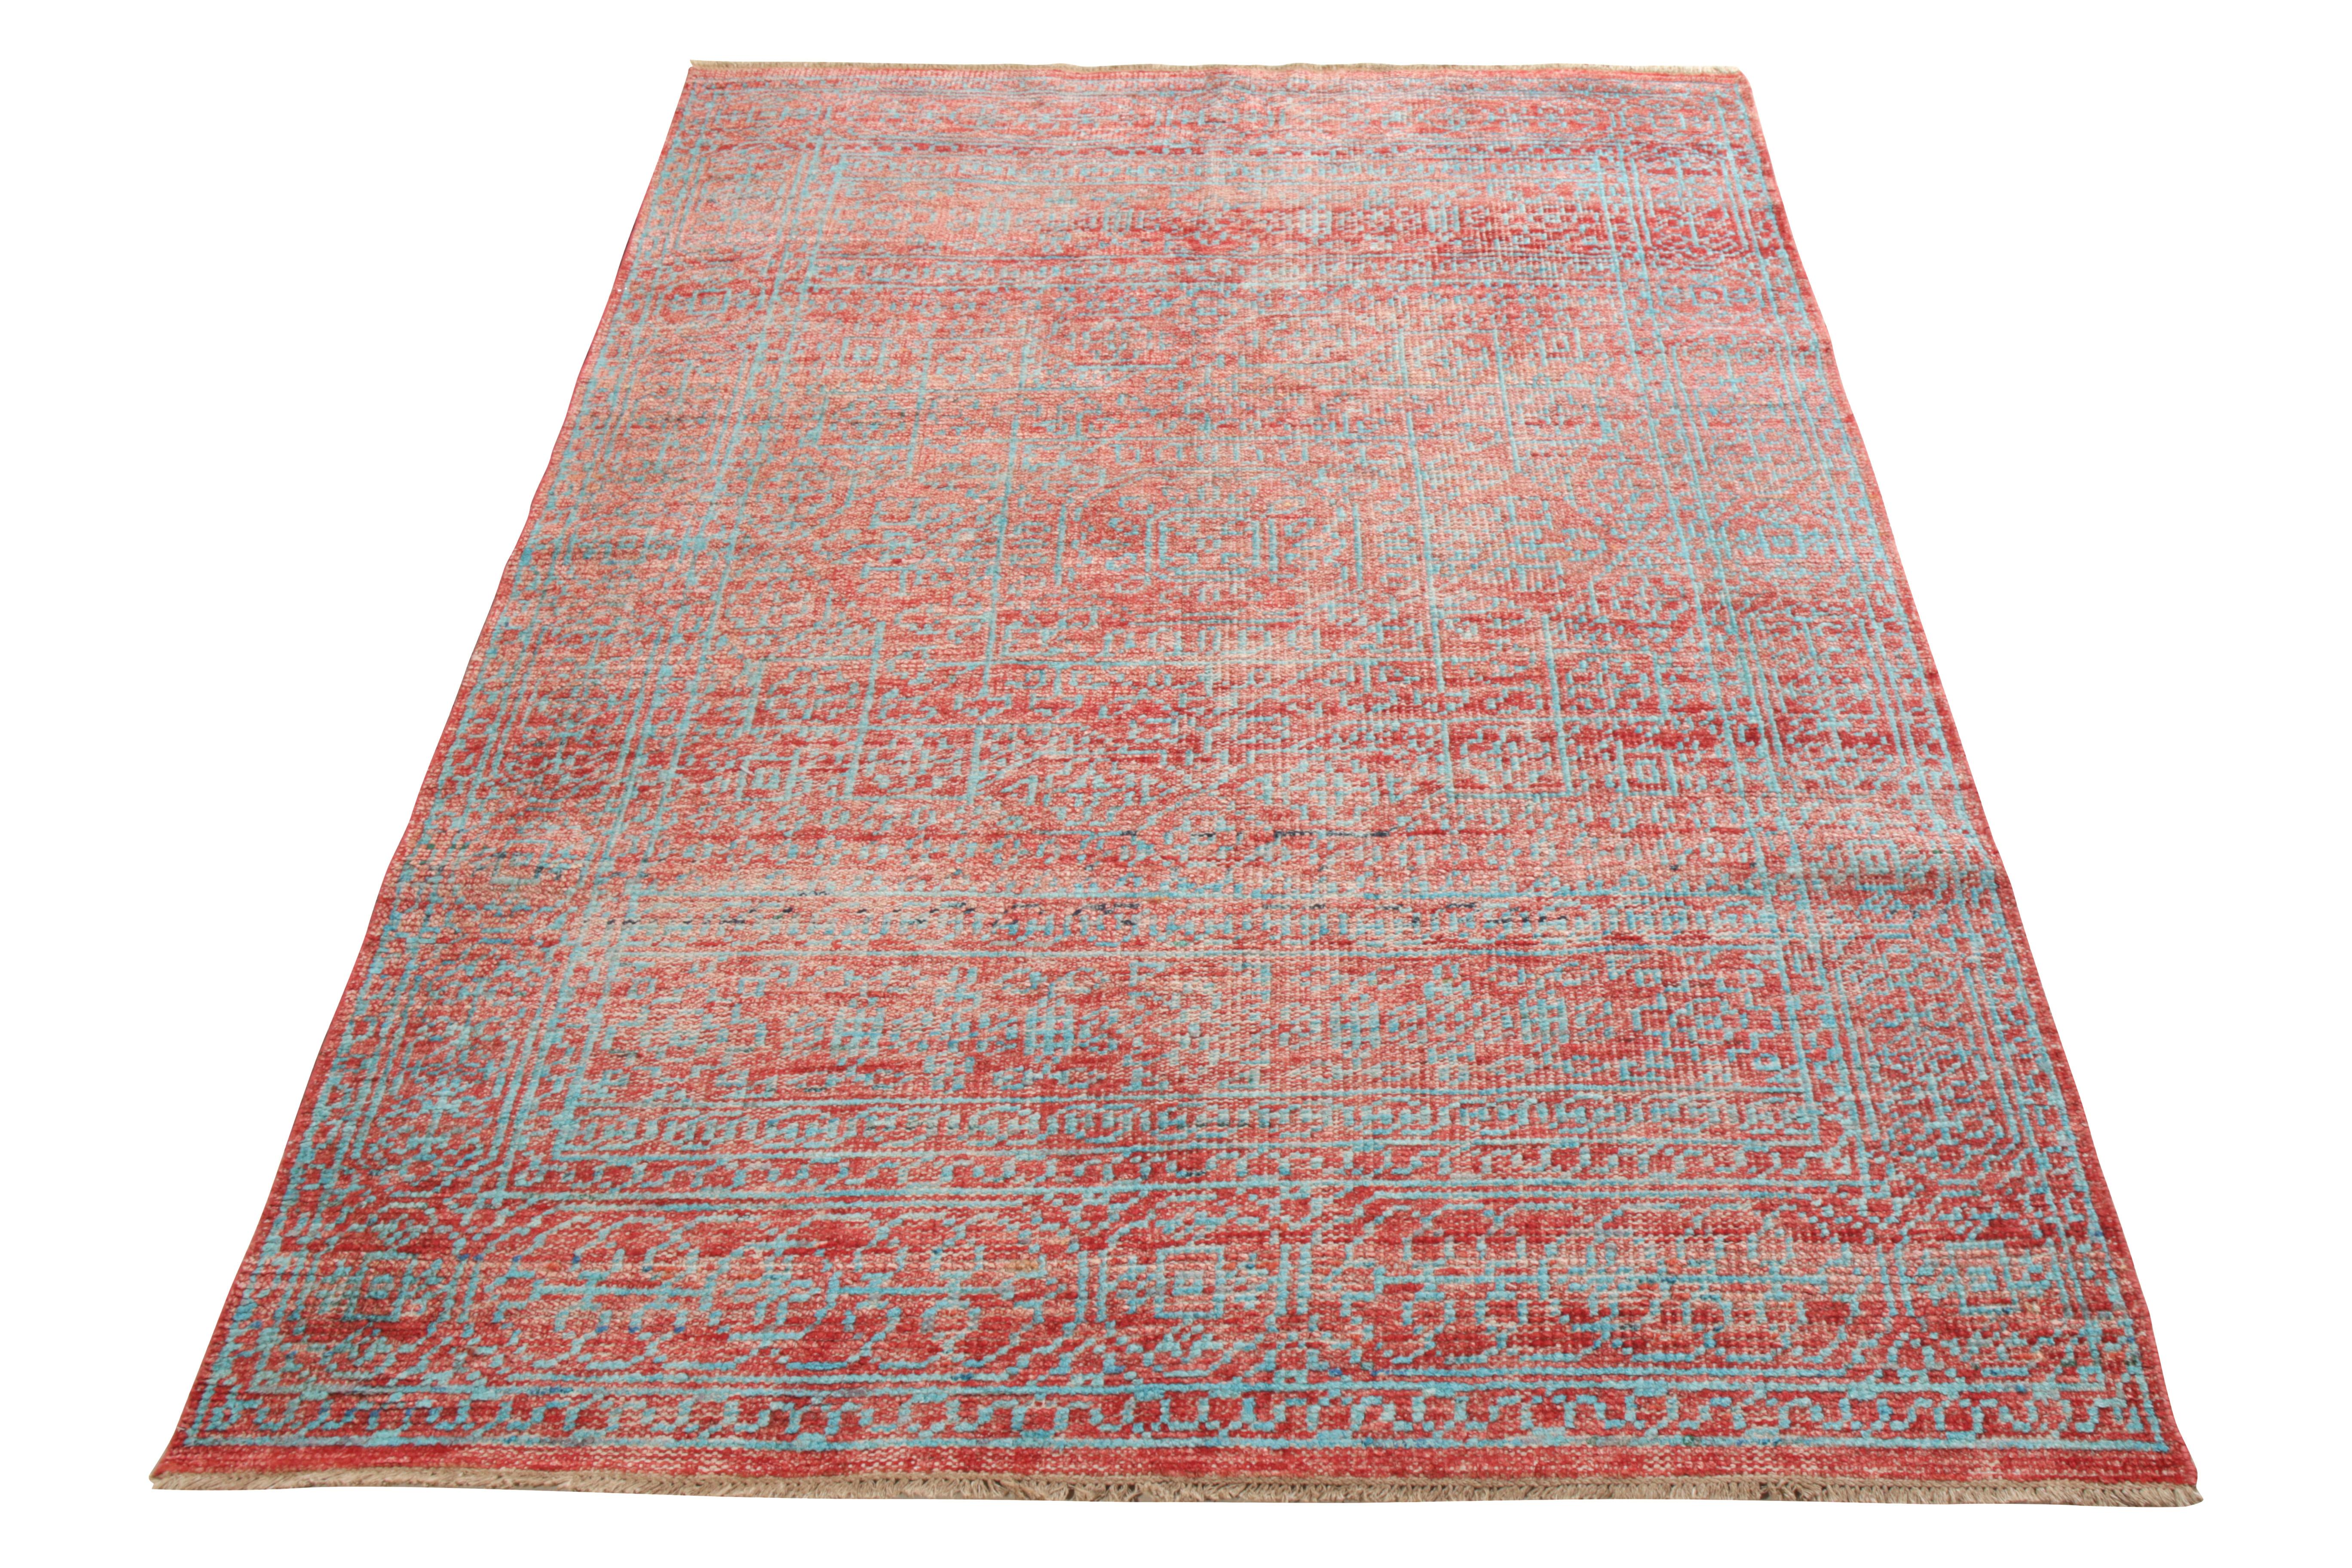 A 5x7 hand-knotted entry belonging to Rug & Kilim’s New & Modern Collection. Proudly showcasing an ambitious geometric pattern atop a clean abrashed base renders a unique personality to the rug that amalgamates modern aesthetics in a